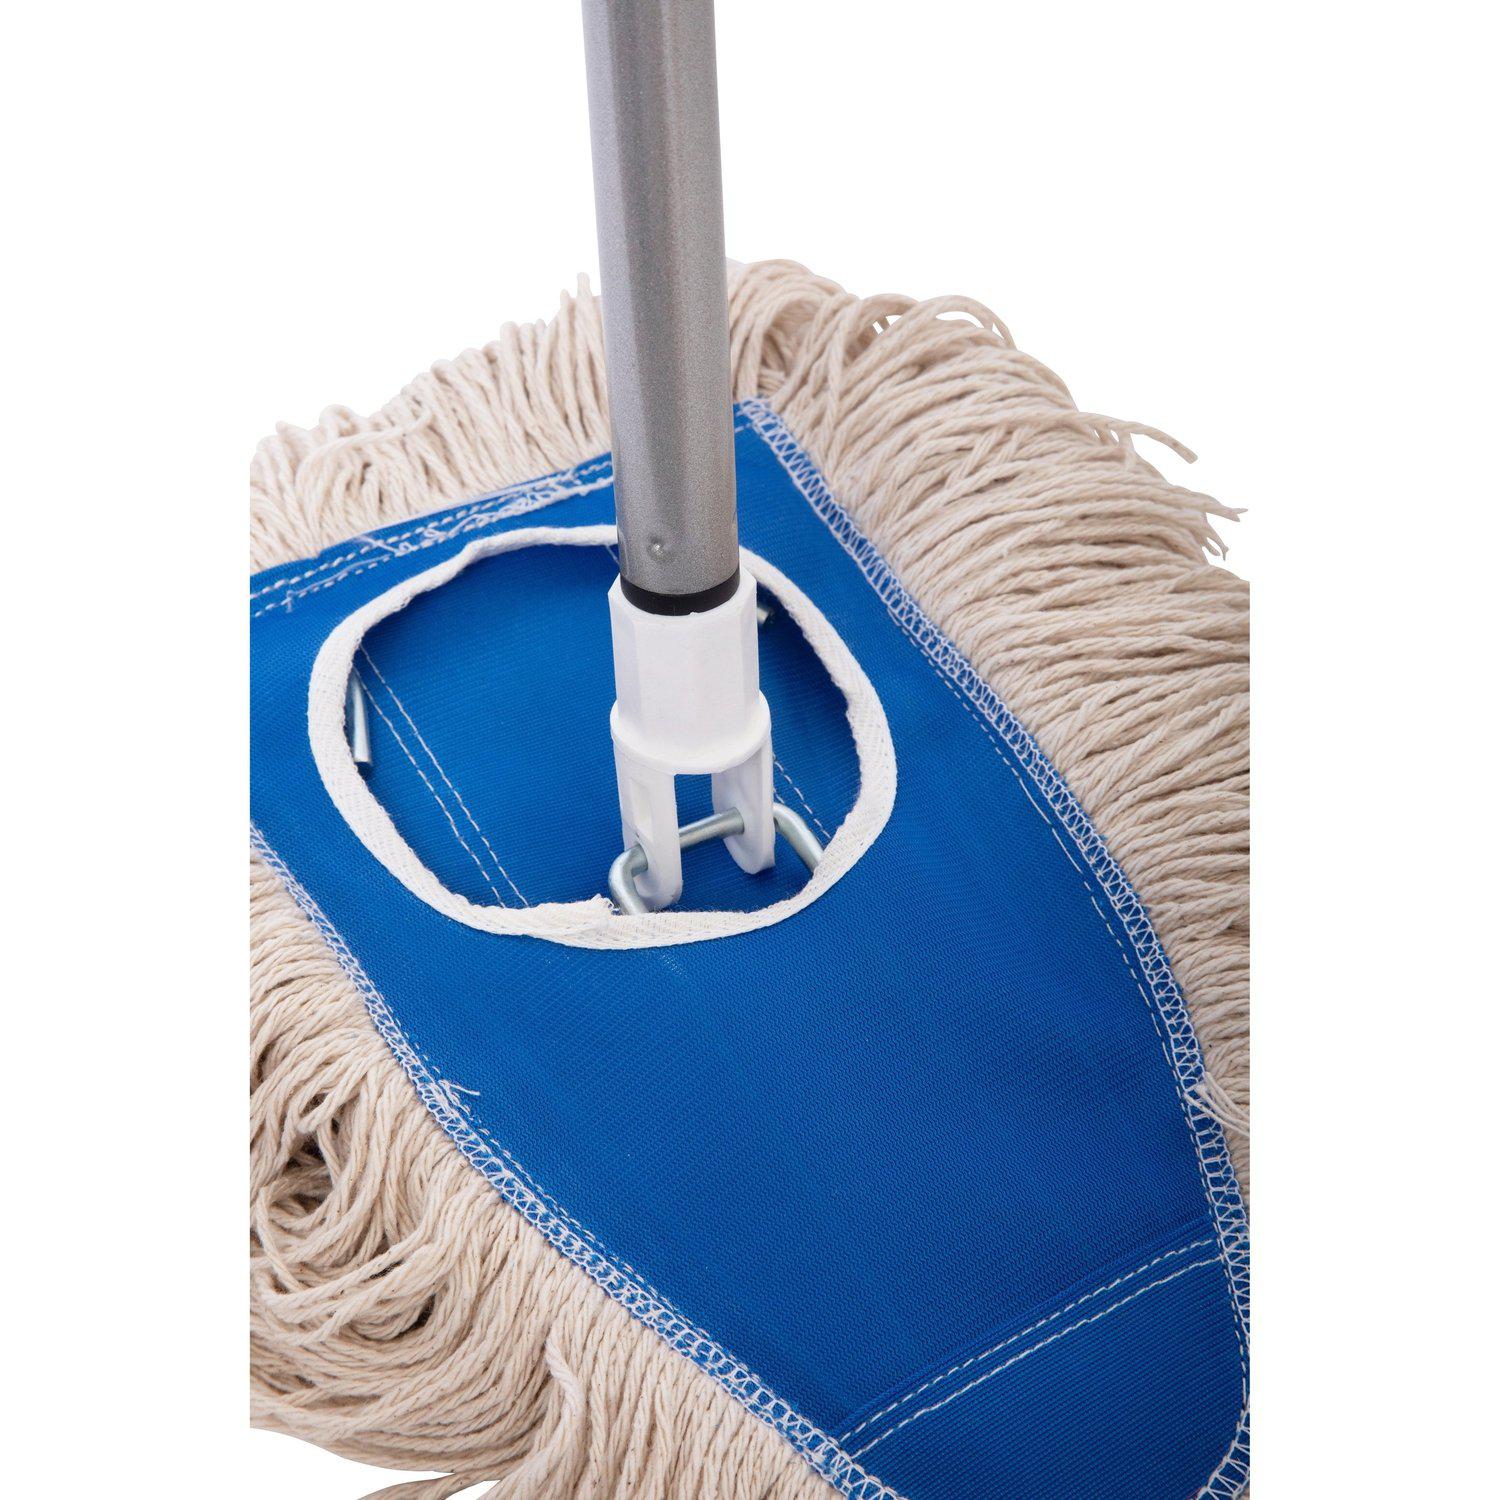 1 Tidy Tools Cotton Floor Mop - Dust Mop For Dry Wet Cleaning